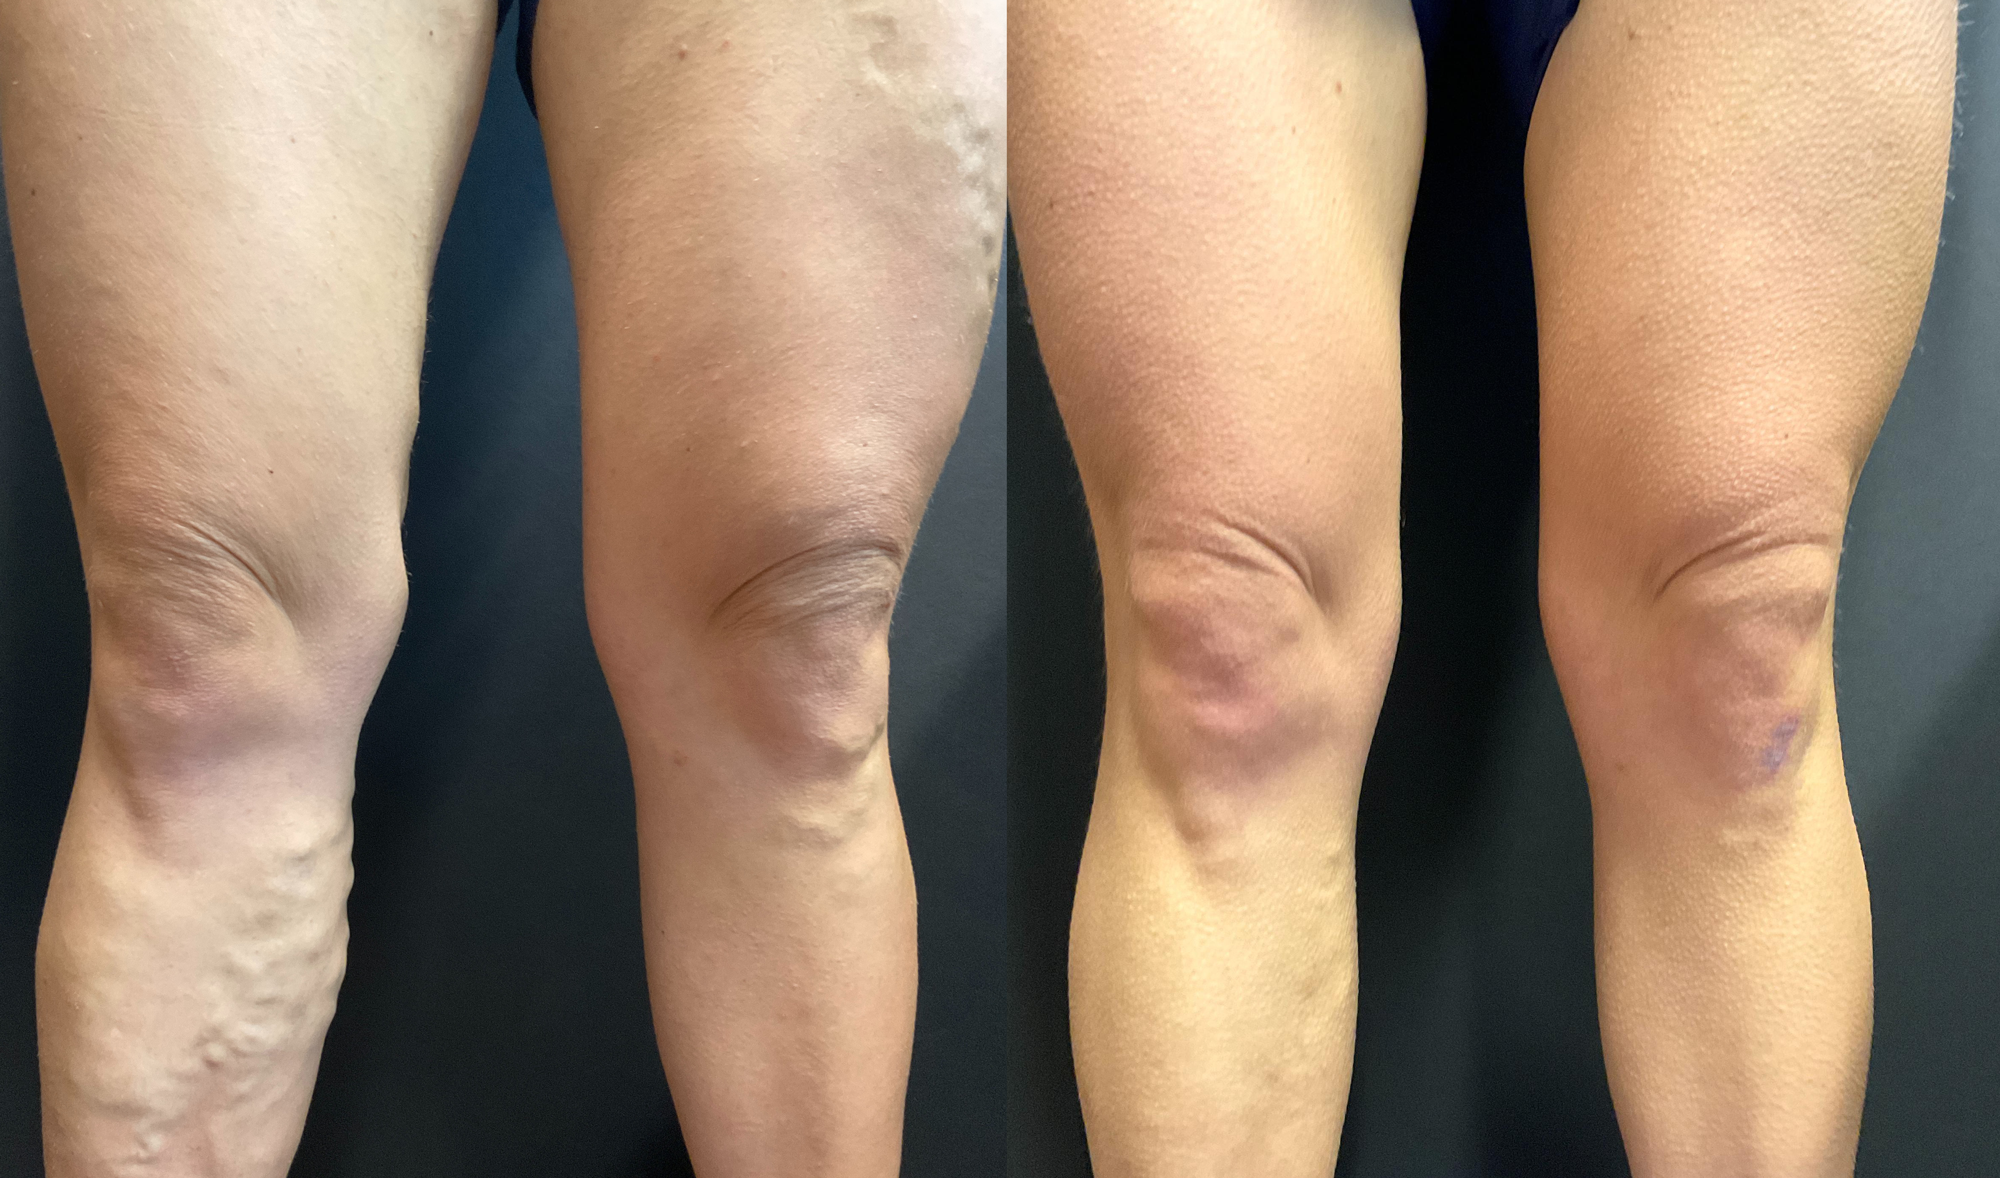 vein treatment before and after image